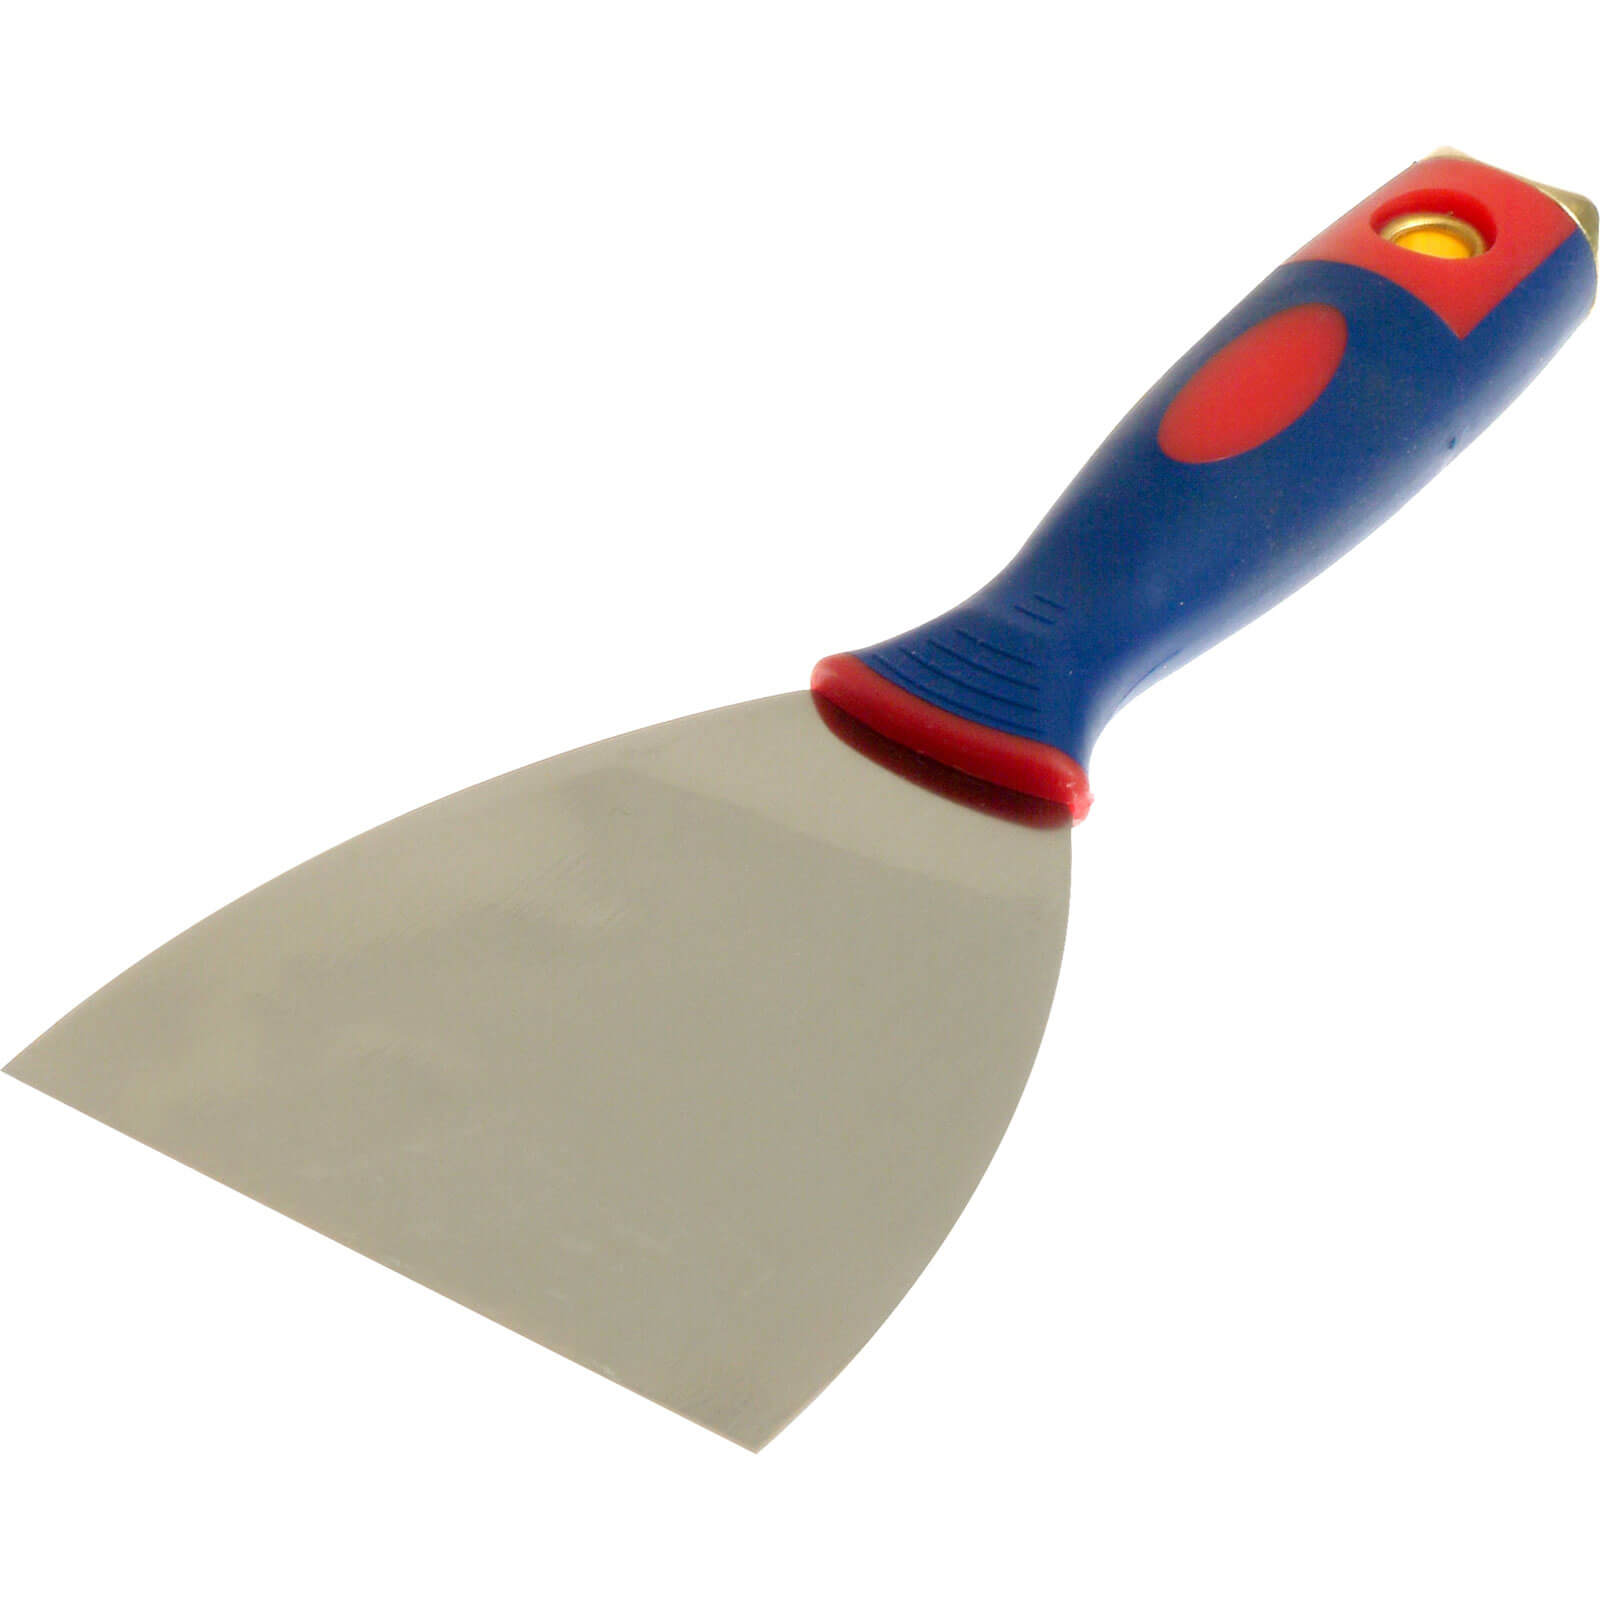 Photos - Putty Knife / Painting Tool RST Stiff Putty Knife 150mm RST551EF 